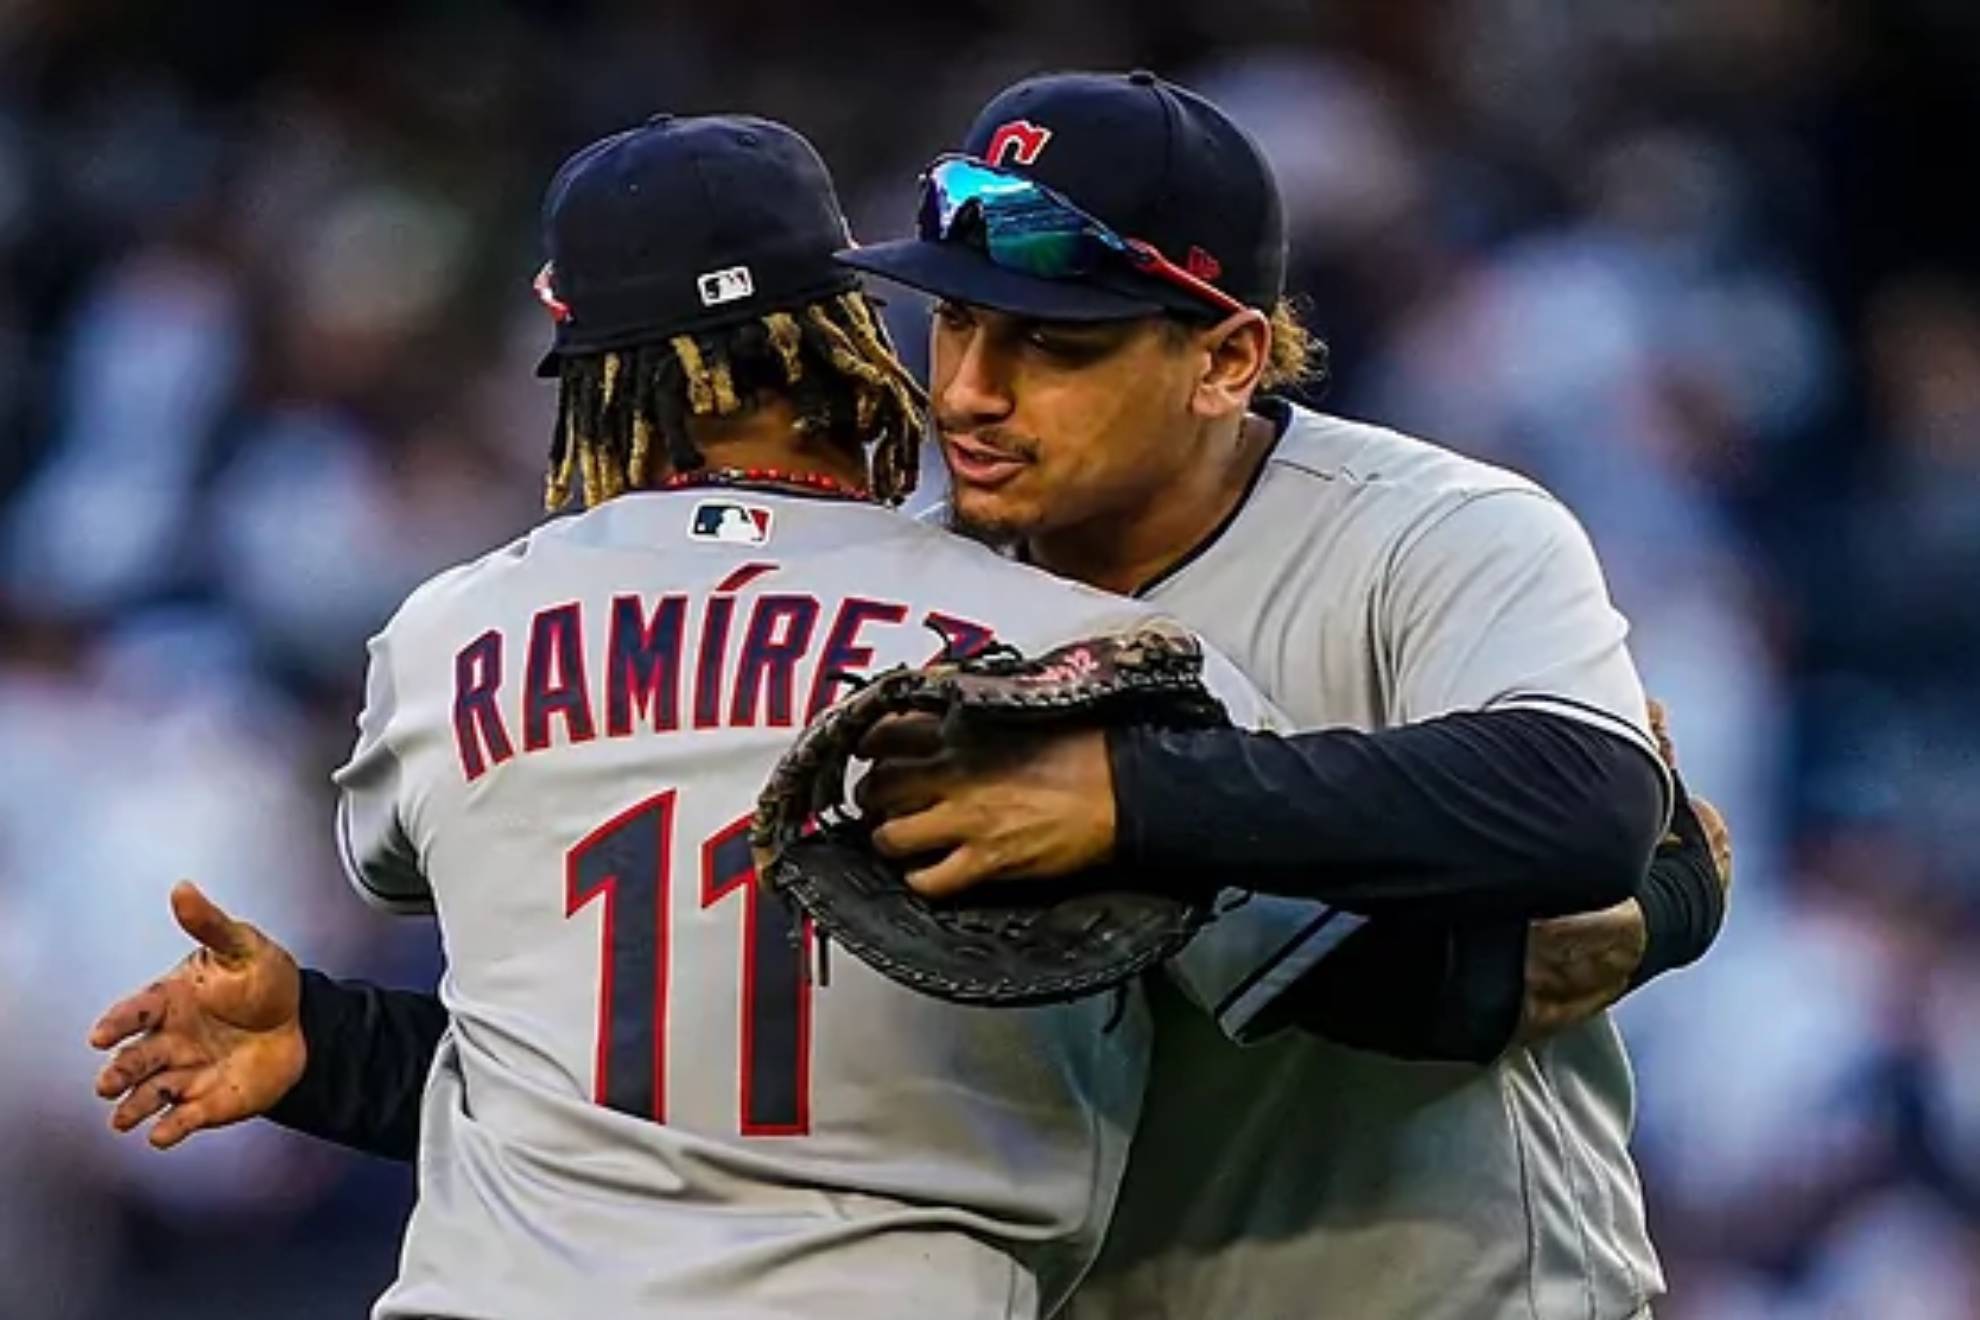 Jose Ramirez connected on a hit and scored a run in five innings against the Yankees in Game 2 of the ALDS/@CleGuardians